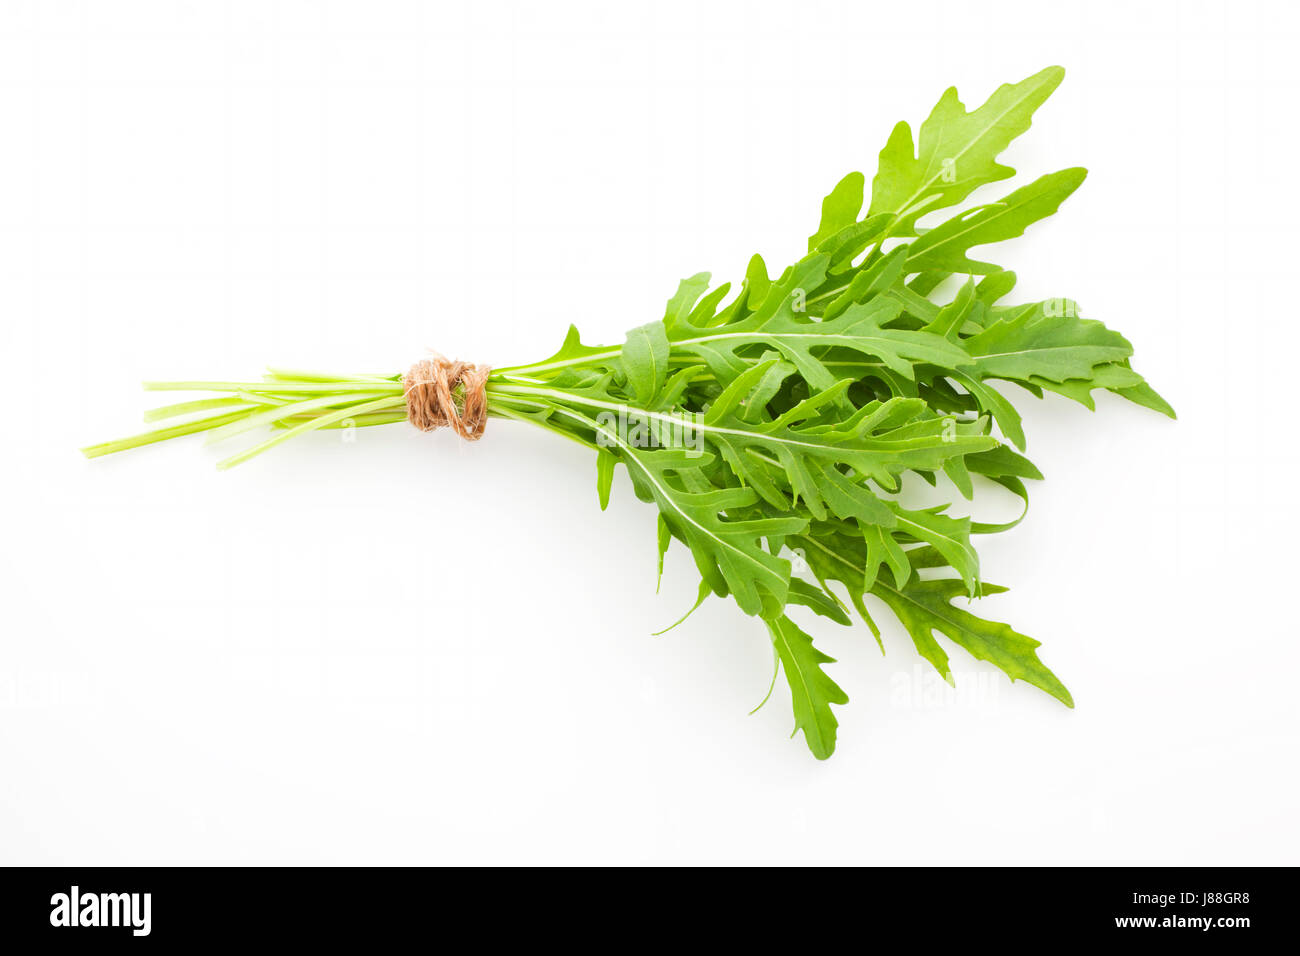 herb, food, aliment, isolated, leaves, boil, cooks, boiling, cooking, Stock Photo